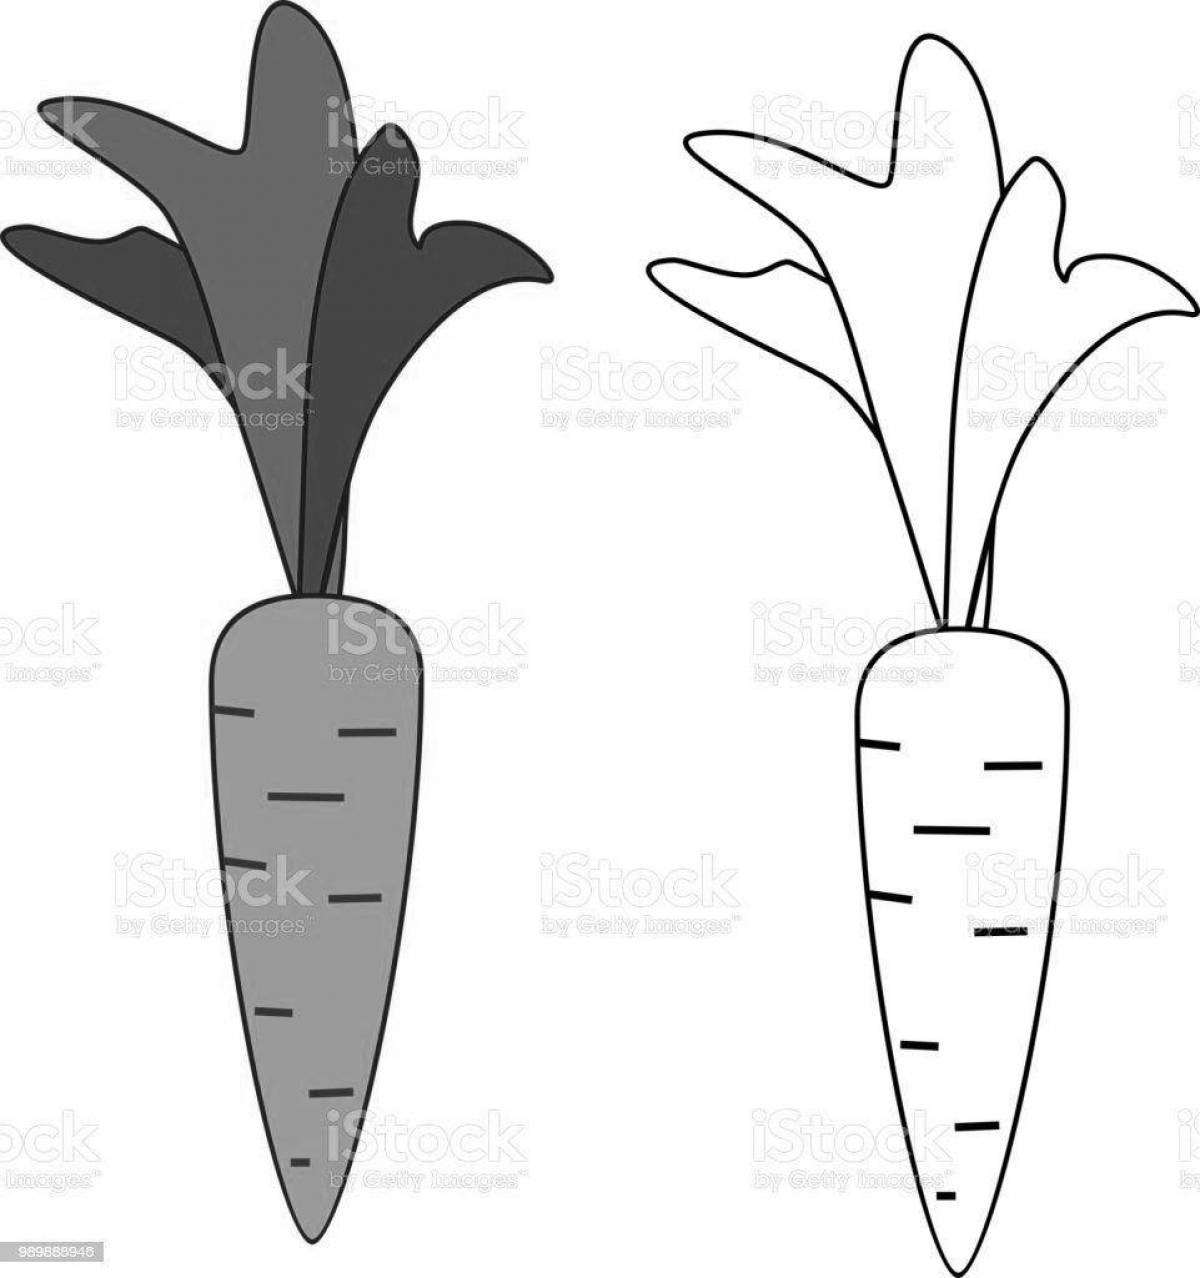 Coloring page with a playful carrot pattern